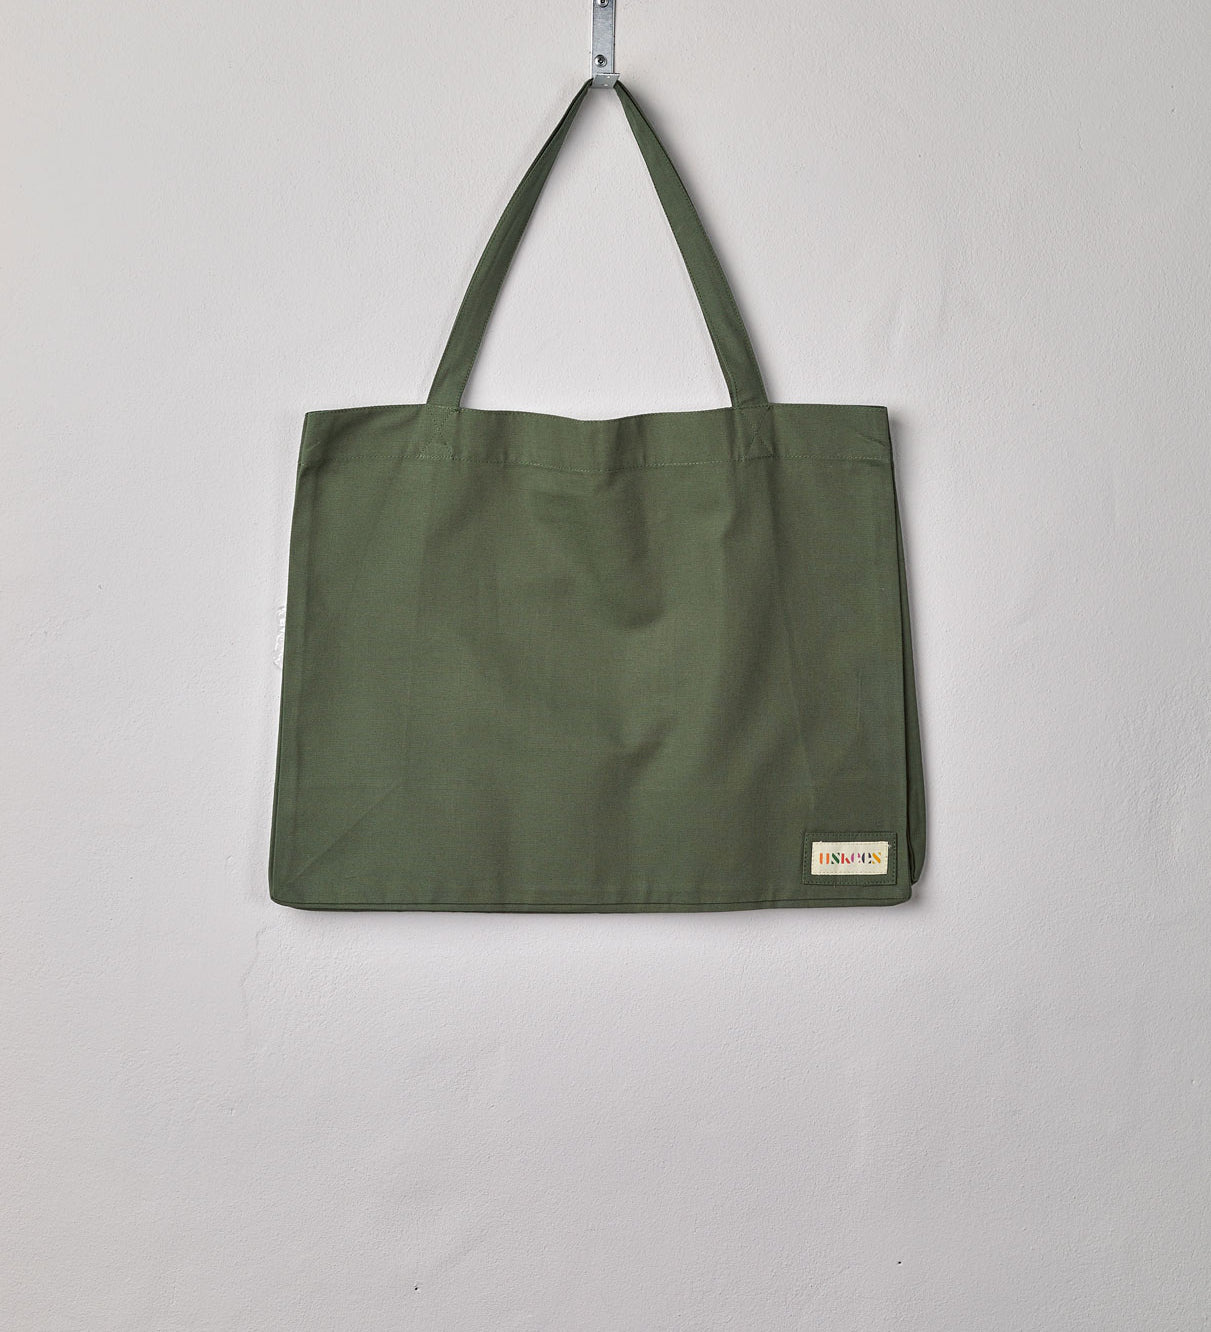 Full front hanging shot of Uskees #4001 large coriander-green tote bag, showing double handles and Uskees woven logo.